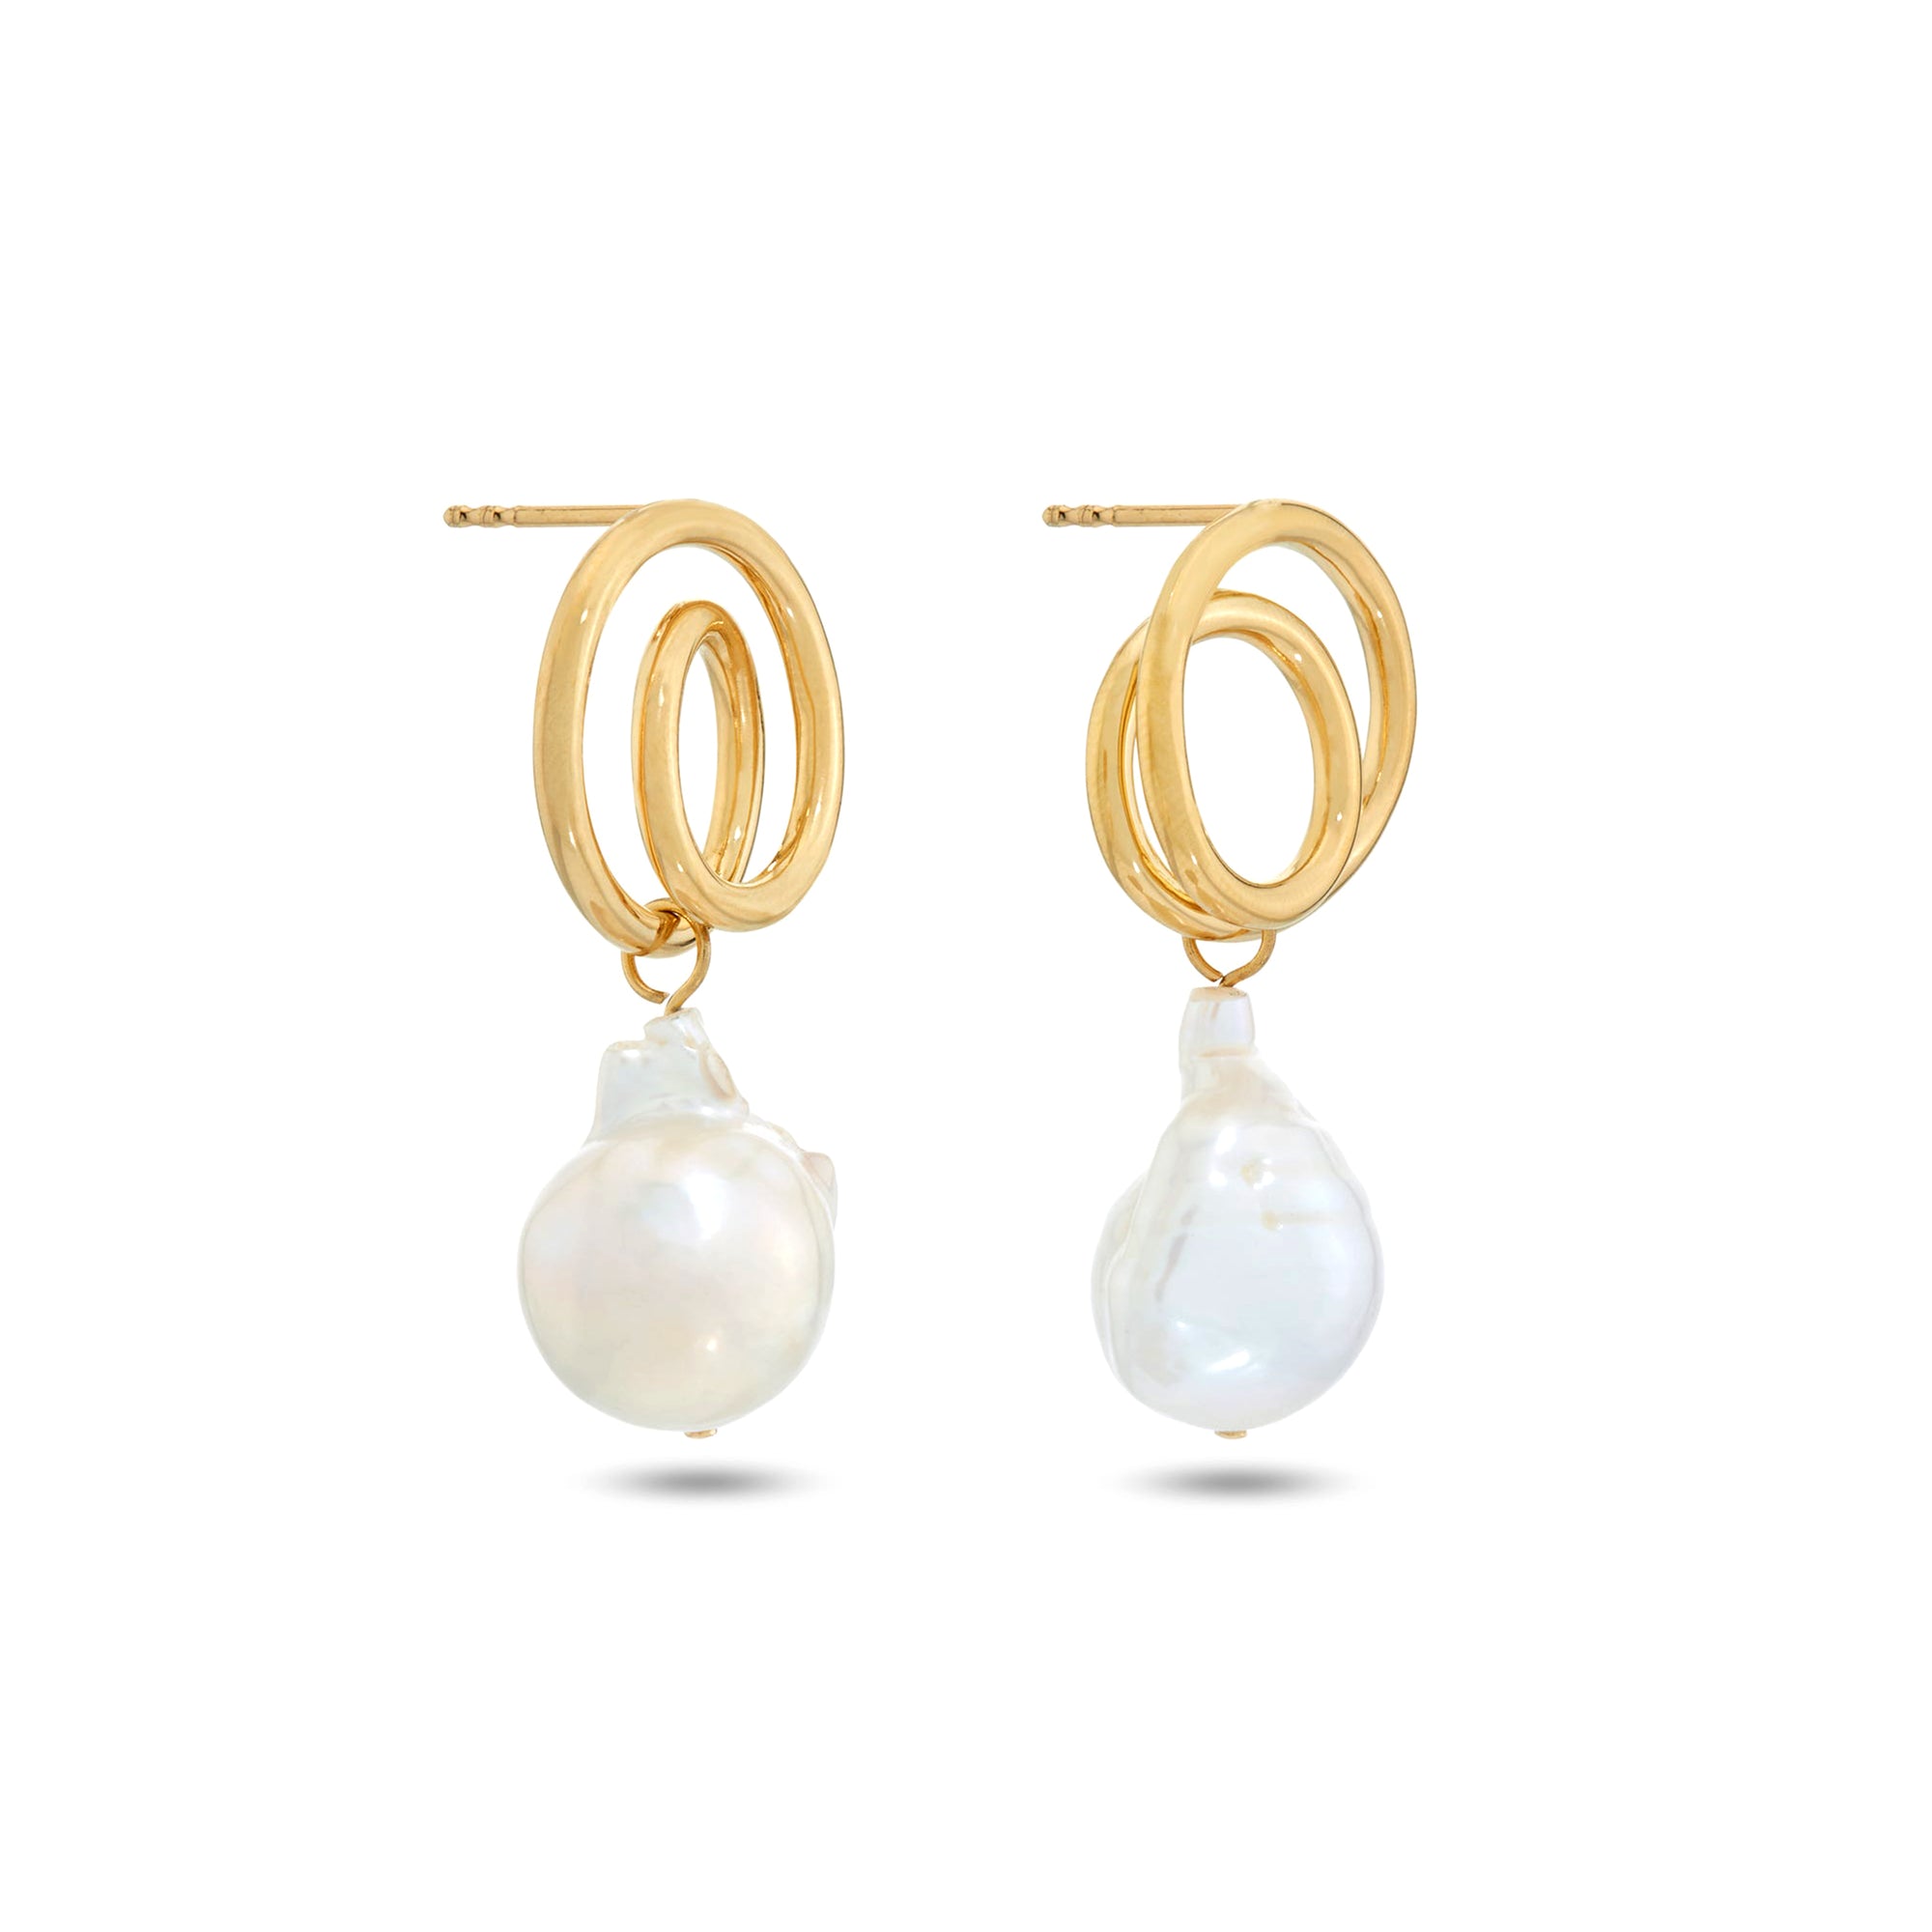 Completedworks - Spiral Earrings with Fresh Water Pearls view 2